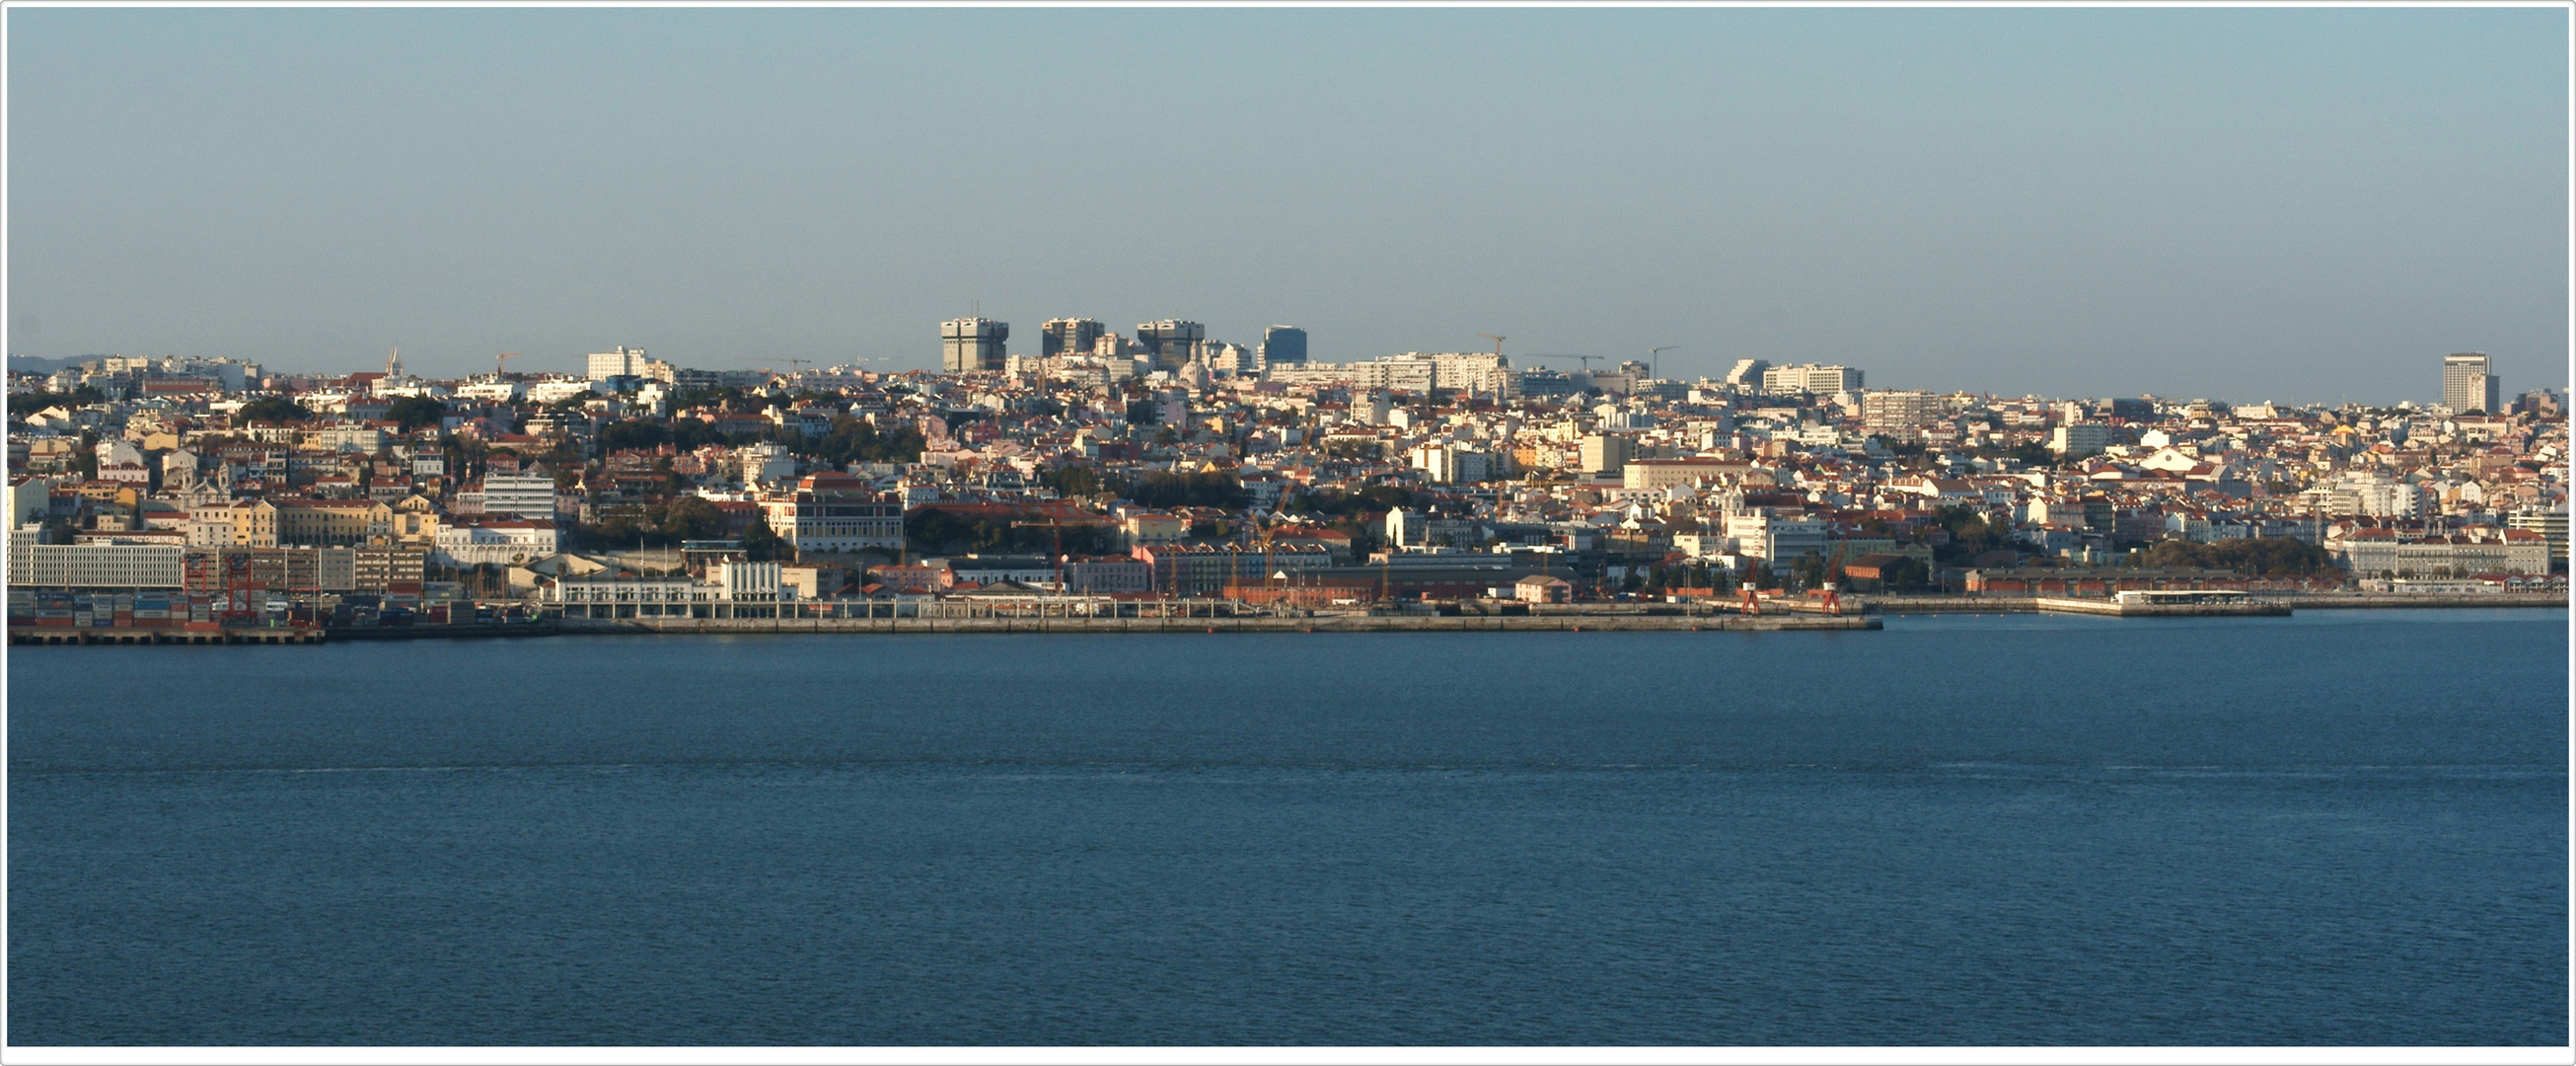 Lisbon from accross the river